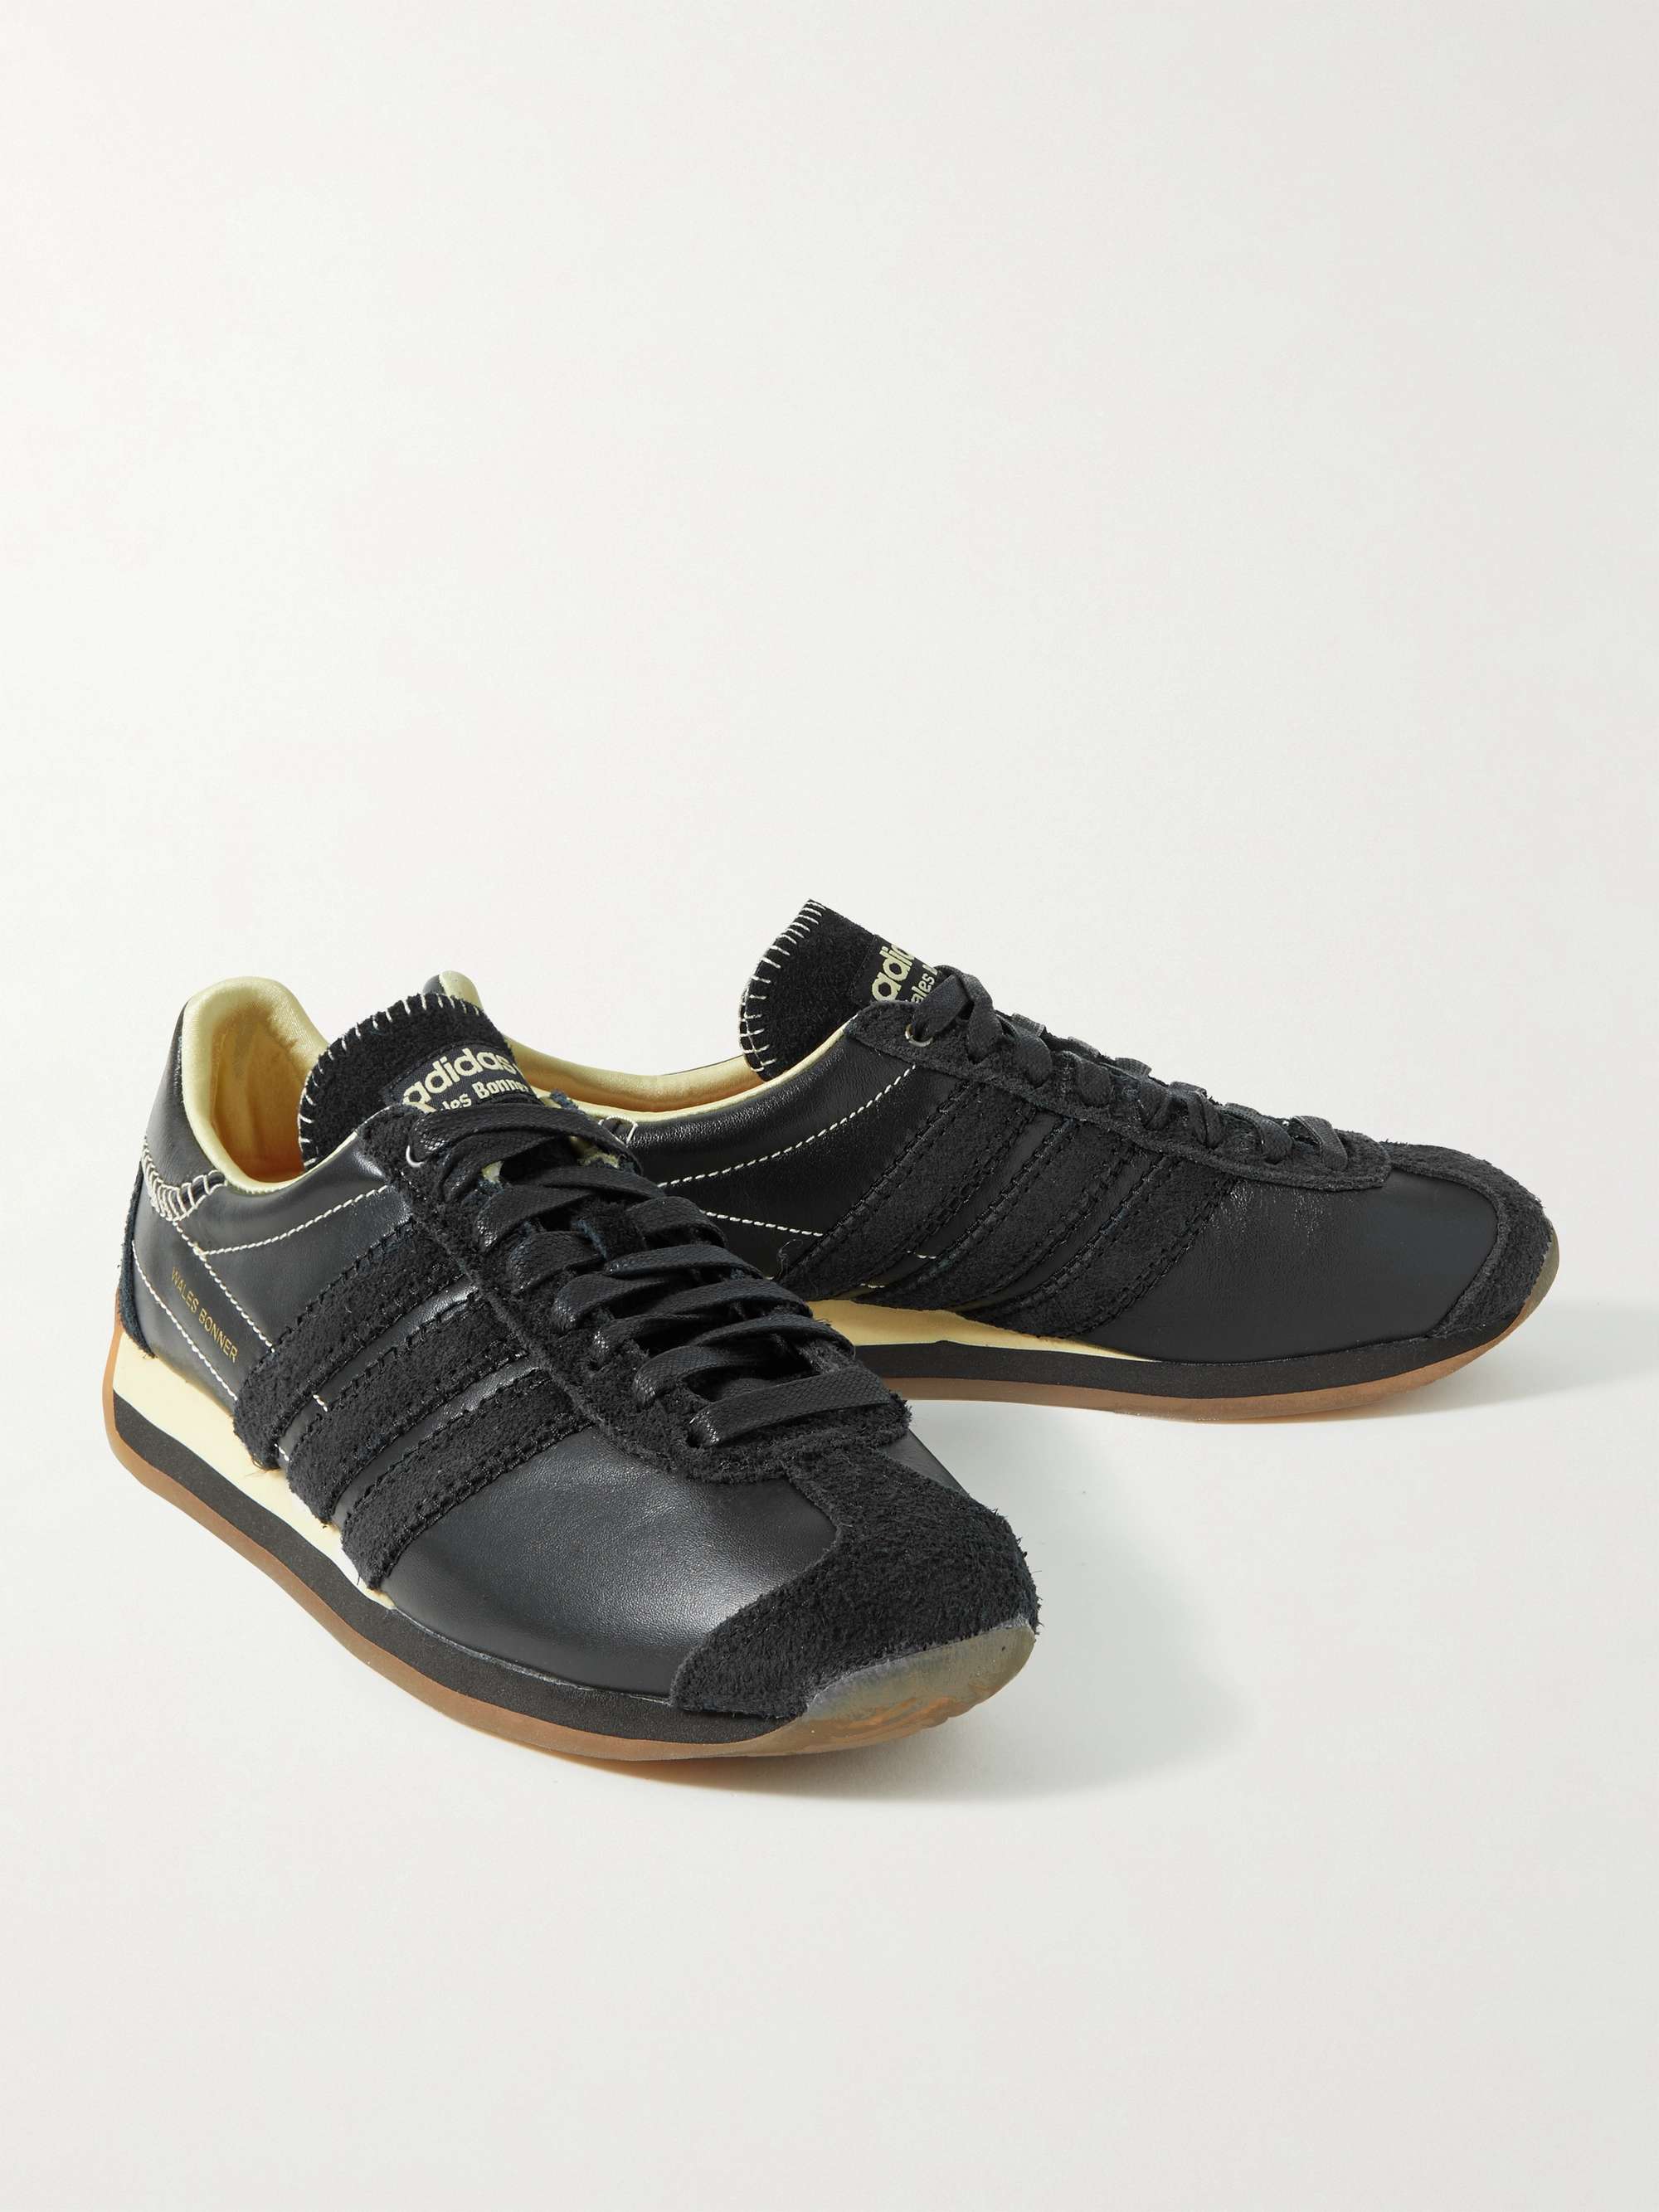 Black + Wales Bonner Suede-Trimmed Leather Sneakers | ADIDAS CONSORTIUM